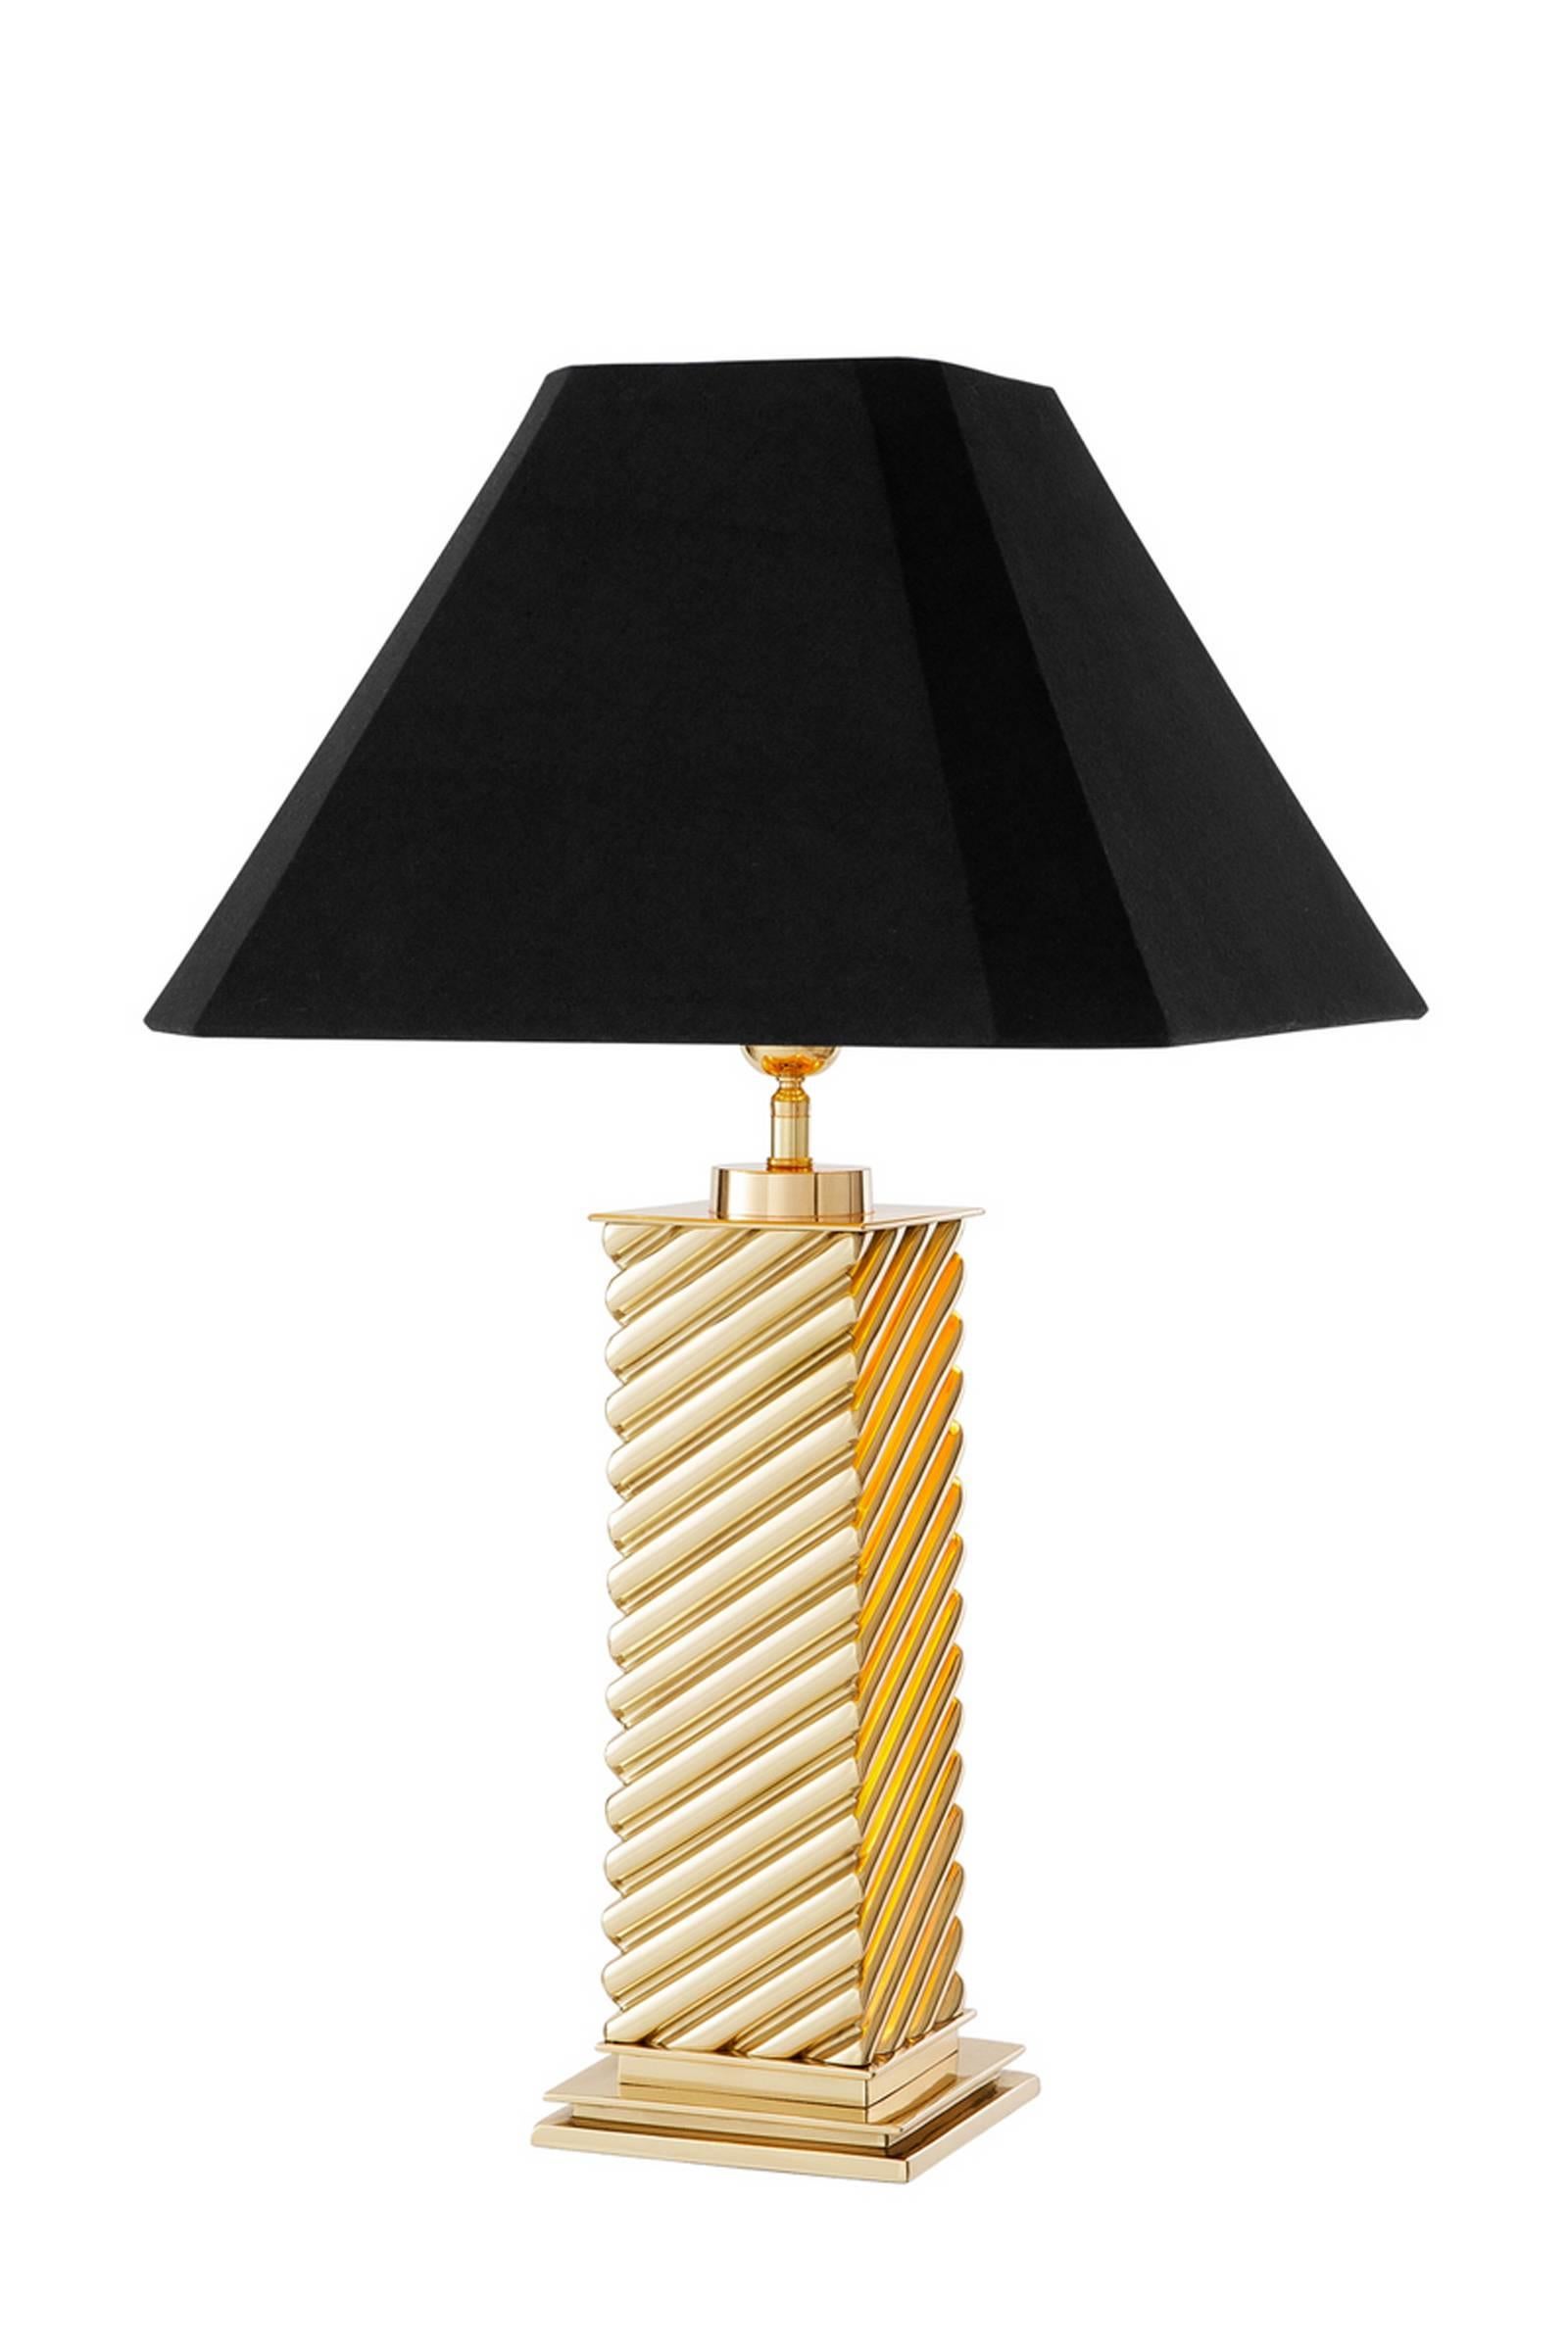 Table lamp column in polished brass with black 
shade. Available in antique bronze finish.
